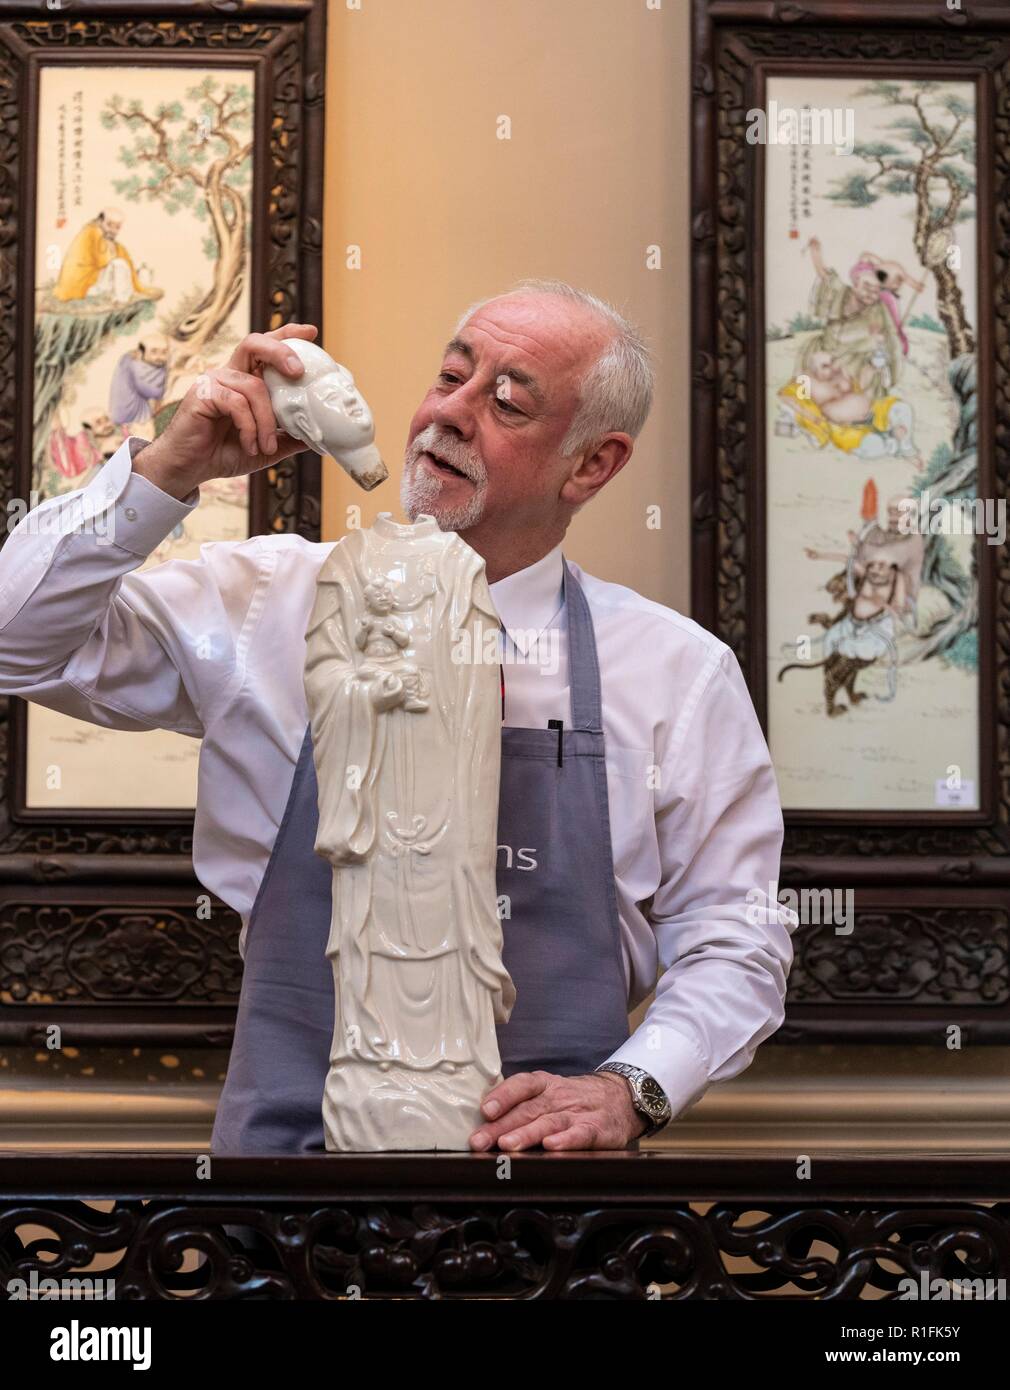 Edinburgh, UK. 12th Nov, 2018. The Bonhams Asian Art Sale takes place on Thursday 15 November at 22 Queen Street Edinburgh starting at 11 am. It features Japanese and Chinese Art including: bronzes, jades, snuff bottles, porcelain, textiles, lacquer, paintings and furniture. Pictured: Danny McIlwraith of Bonhams holding a tall Blanc-De Chine figure of Guanyin and Boy valued between £600 and £800 Credit: Rich Dyson/Alamy Live News Stock Photo